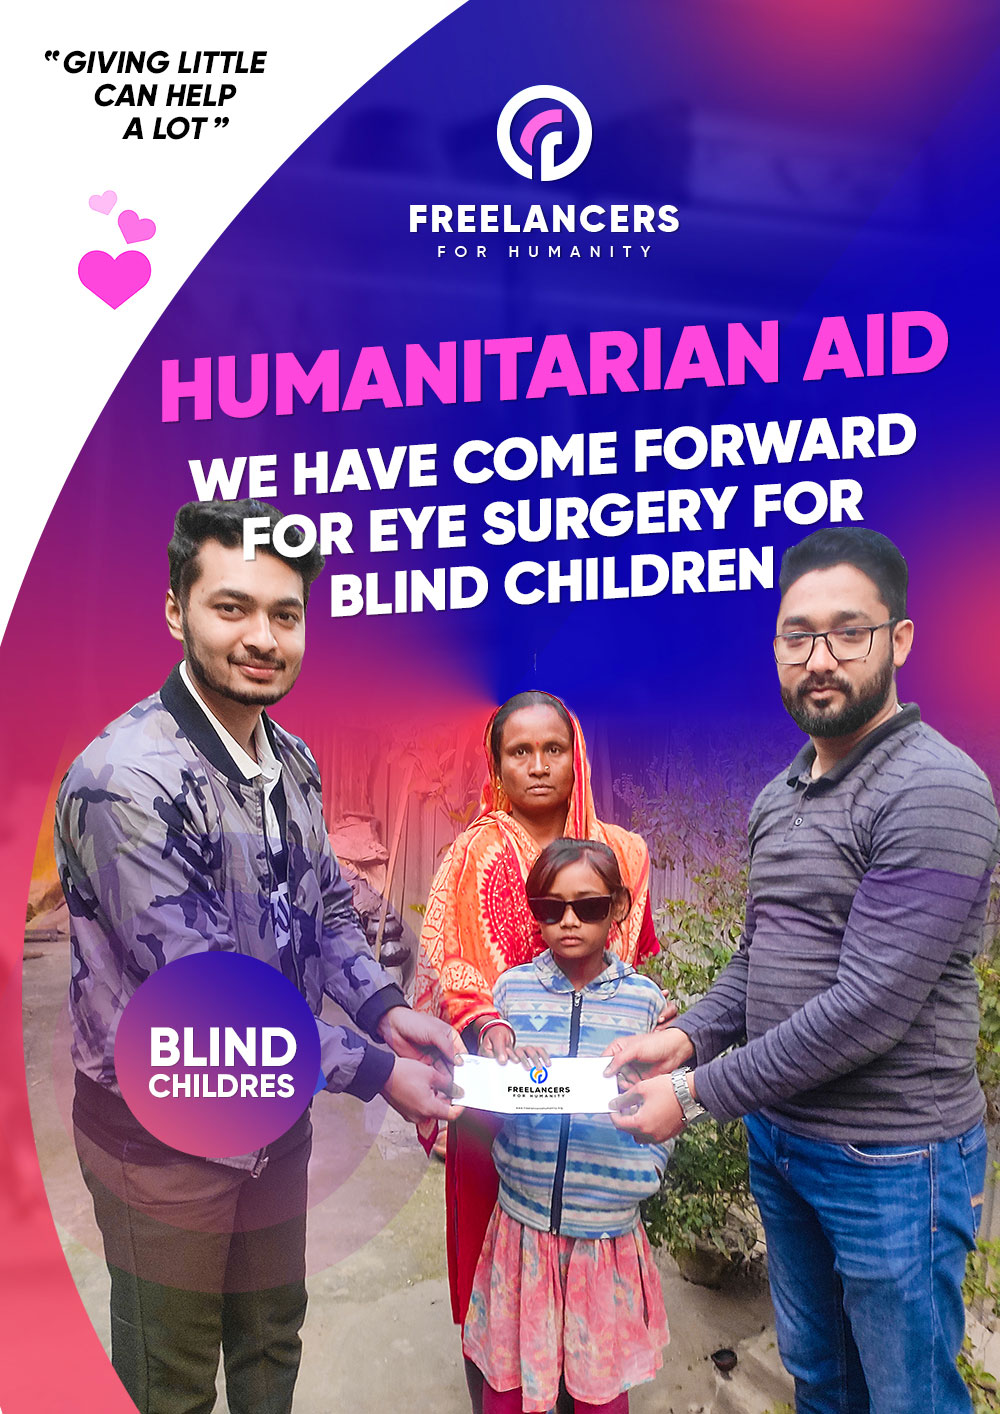 f4u_We have come forward for eye surgery for blind children